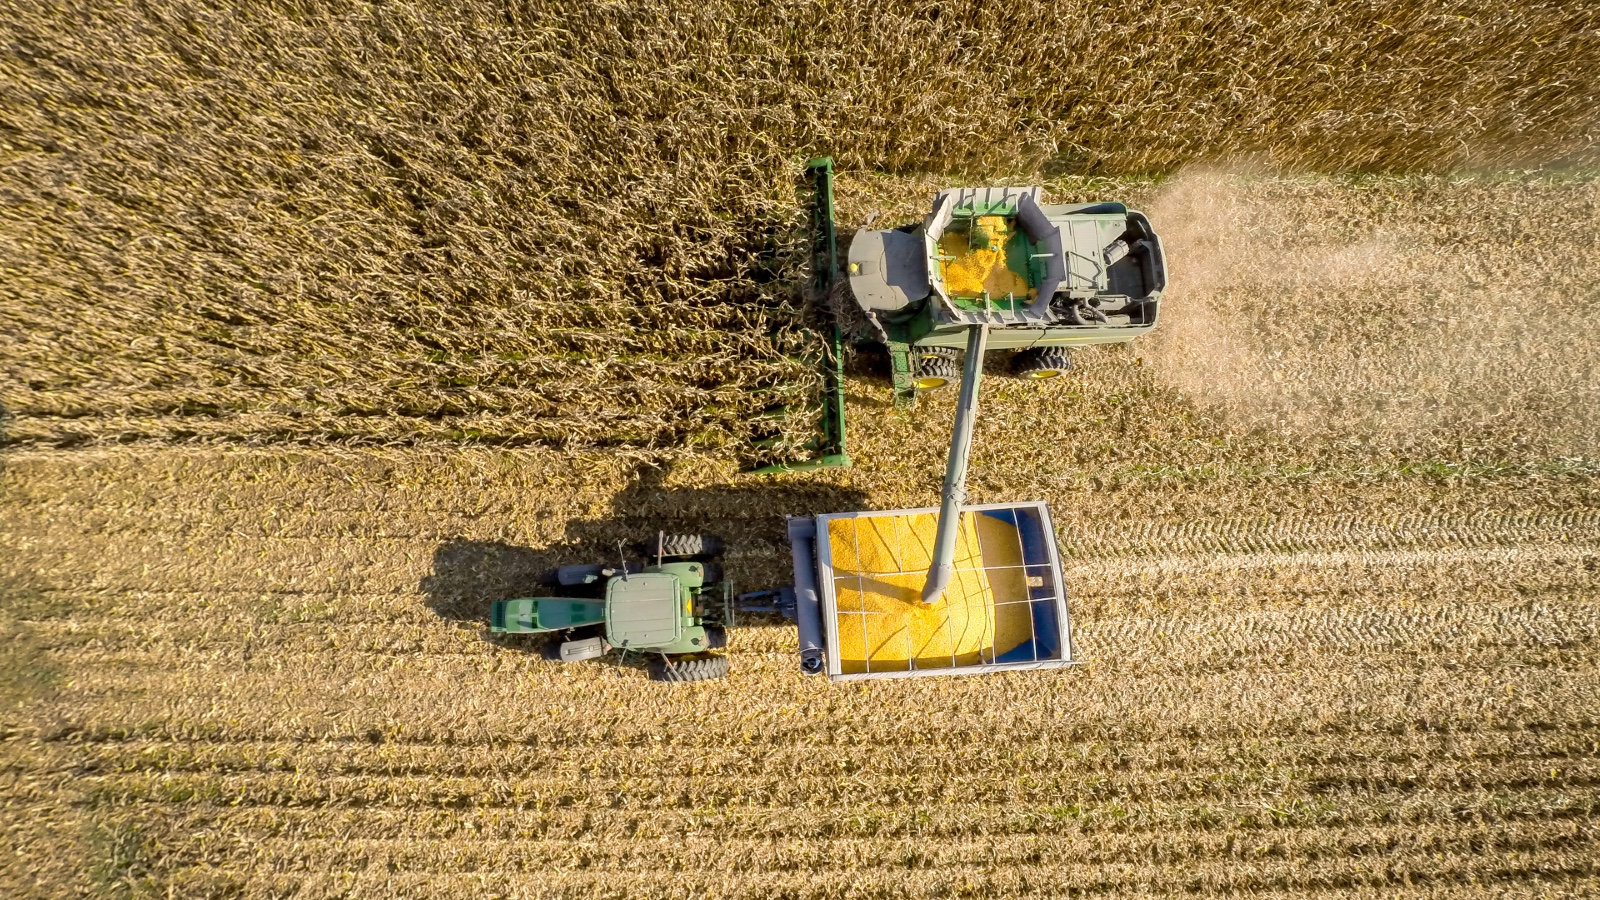 A combine clears a discipline of corn in Maryland as viewed from above